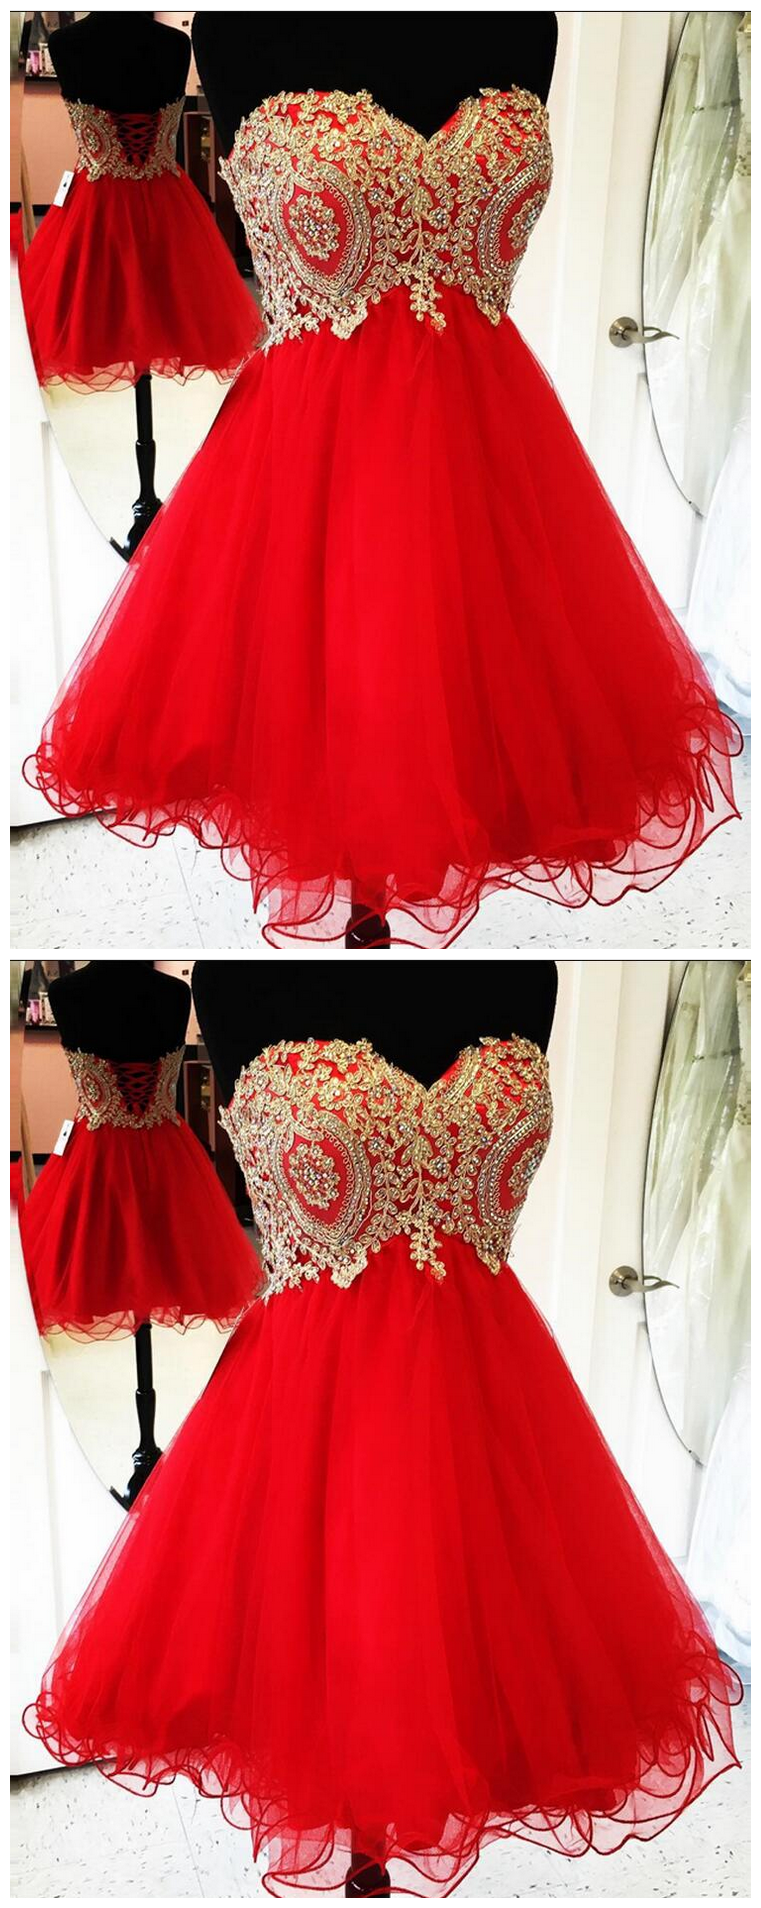 Red Tulle Party Dress,a Line Short Prom Dress, Strapless Lace Appliques Party Dress,beaded Prom Gowns Prom Dresses